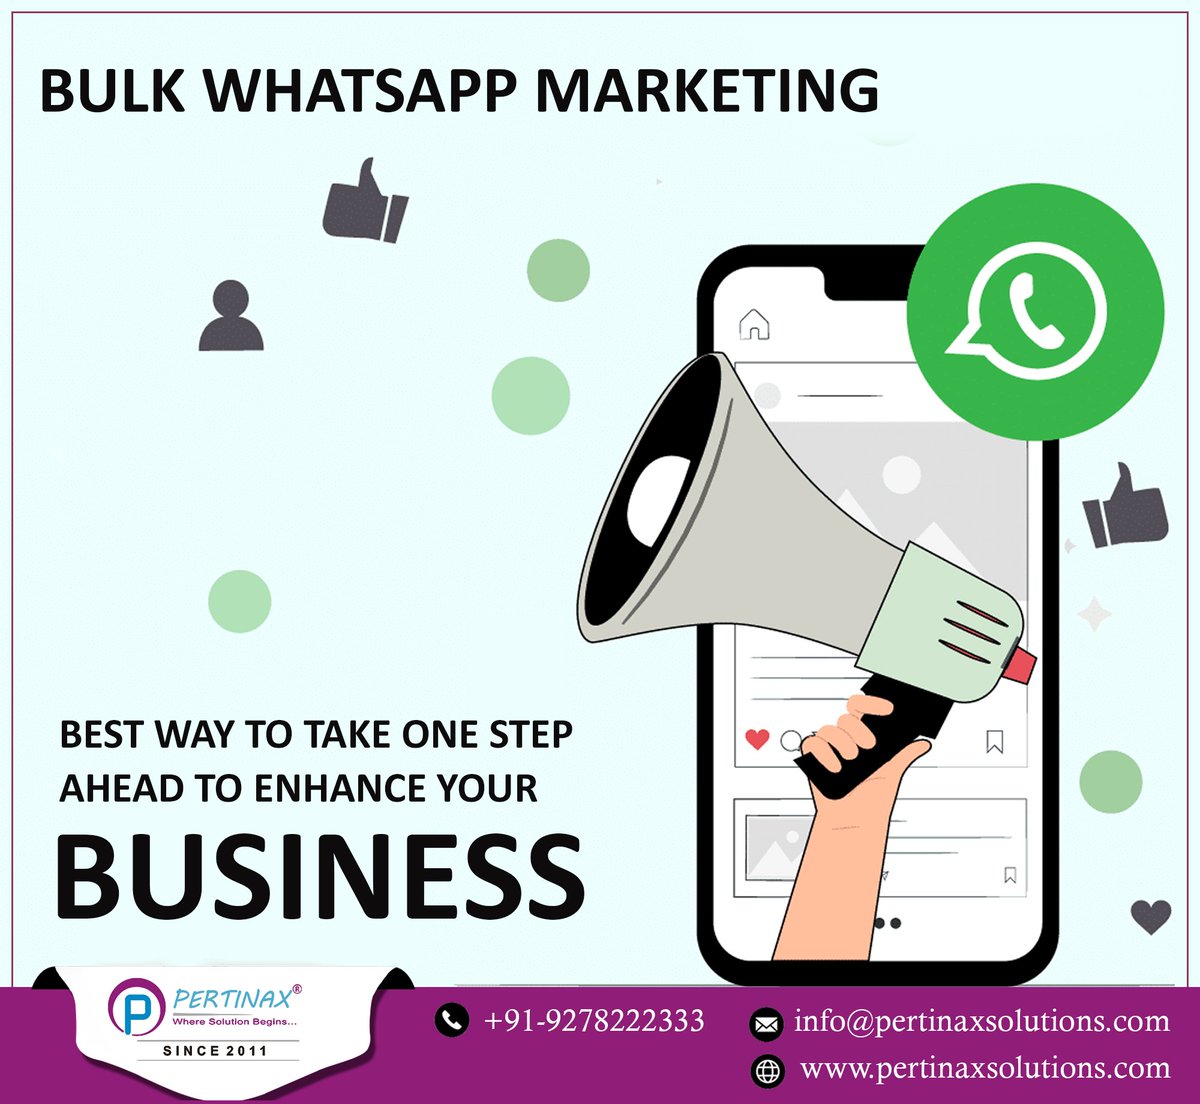 BULK WHATSAPP MARKETING
BEST WAY TO TAKE ONE STEP
AHEAD TO ENHANCE YOUR BUSINESS

📷09278222333
📷pertinaxsolutions.com
#whatsappmarketing #whatsappbusiness #whatsapp #bulkwhatsapp #bulkwhatsappmarketing #whatsappmarketing #digitalmarketing #brand #brandpromotion #DigitalIndia